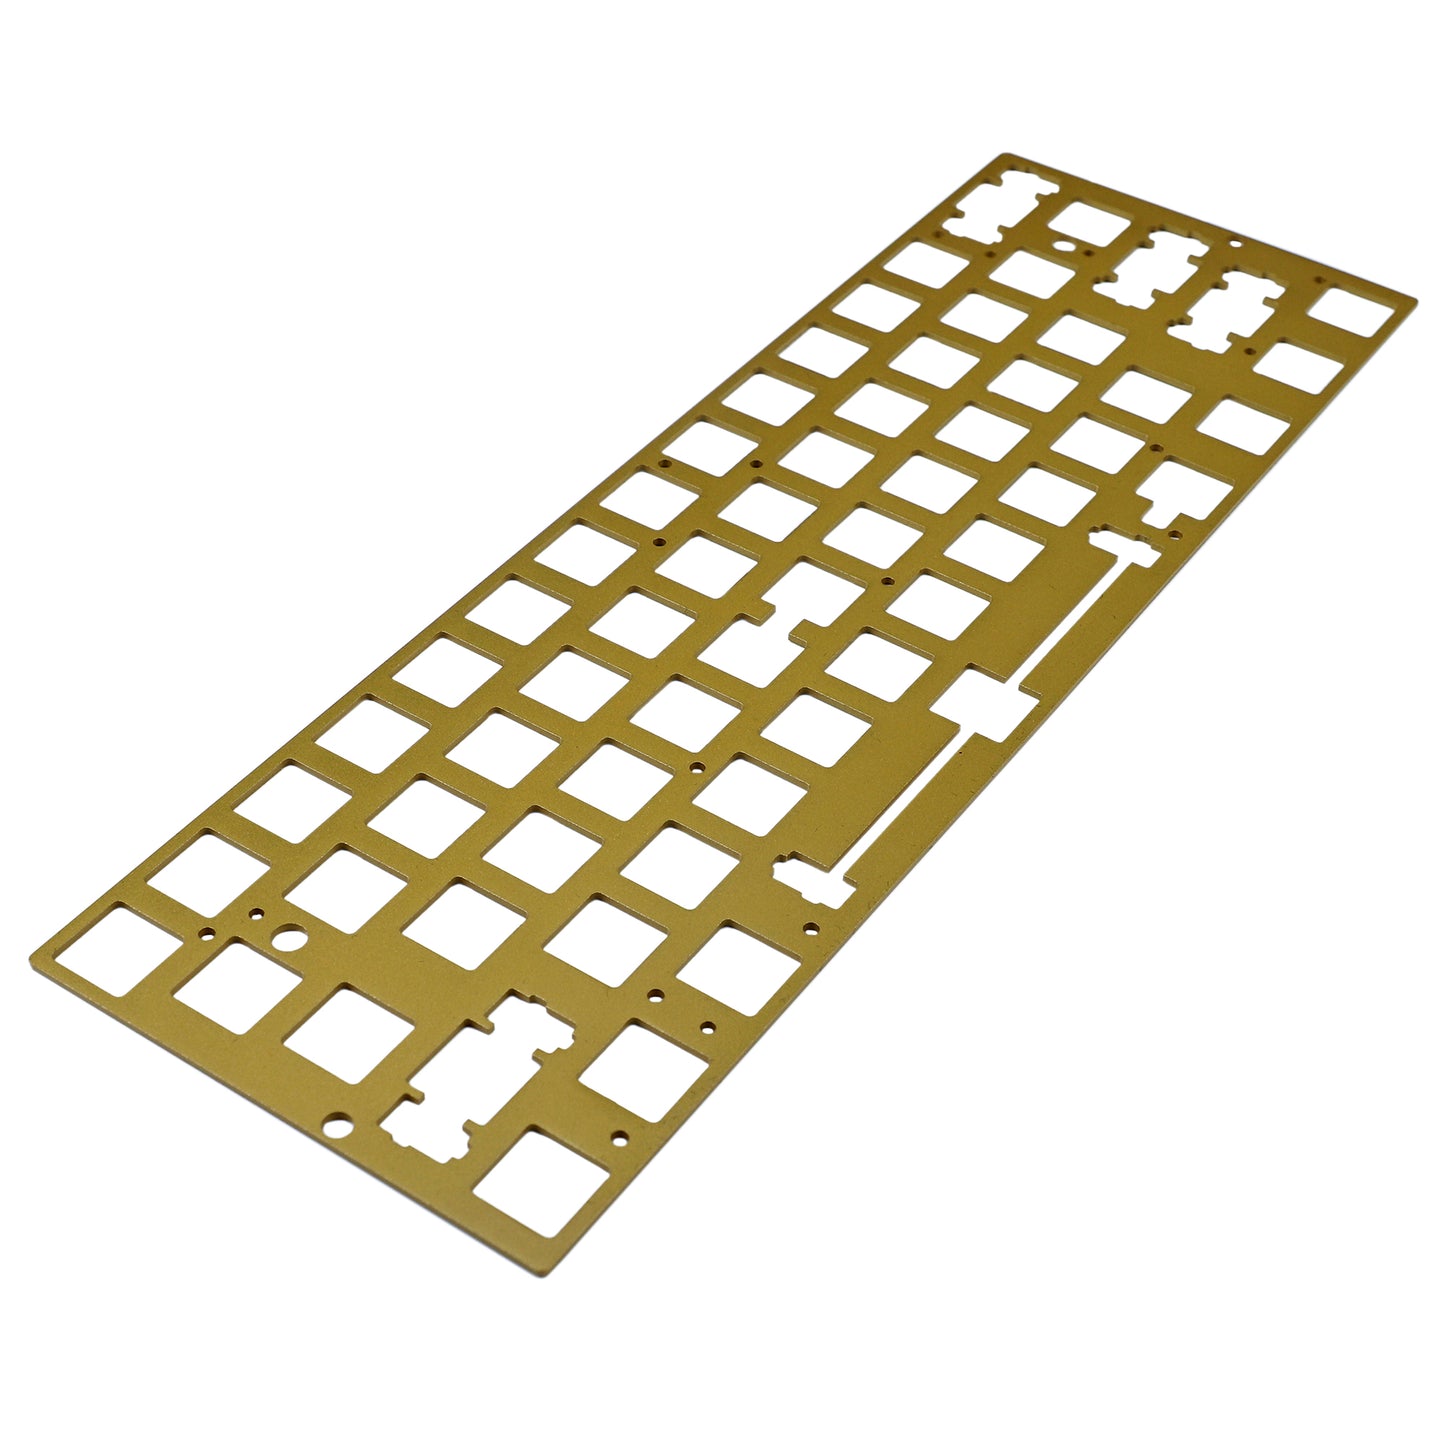 GK61 Aluminum / Steel / Brass Plate And Stabilizers(GH60 PCB GK61 Hot Swap PCB Using/Plate Mounted)